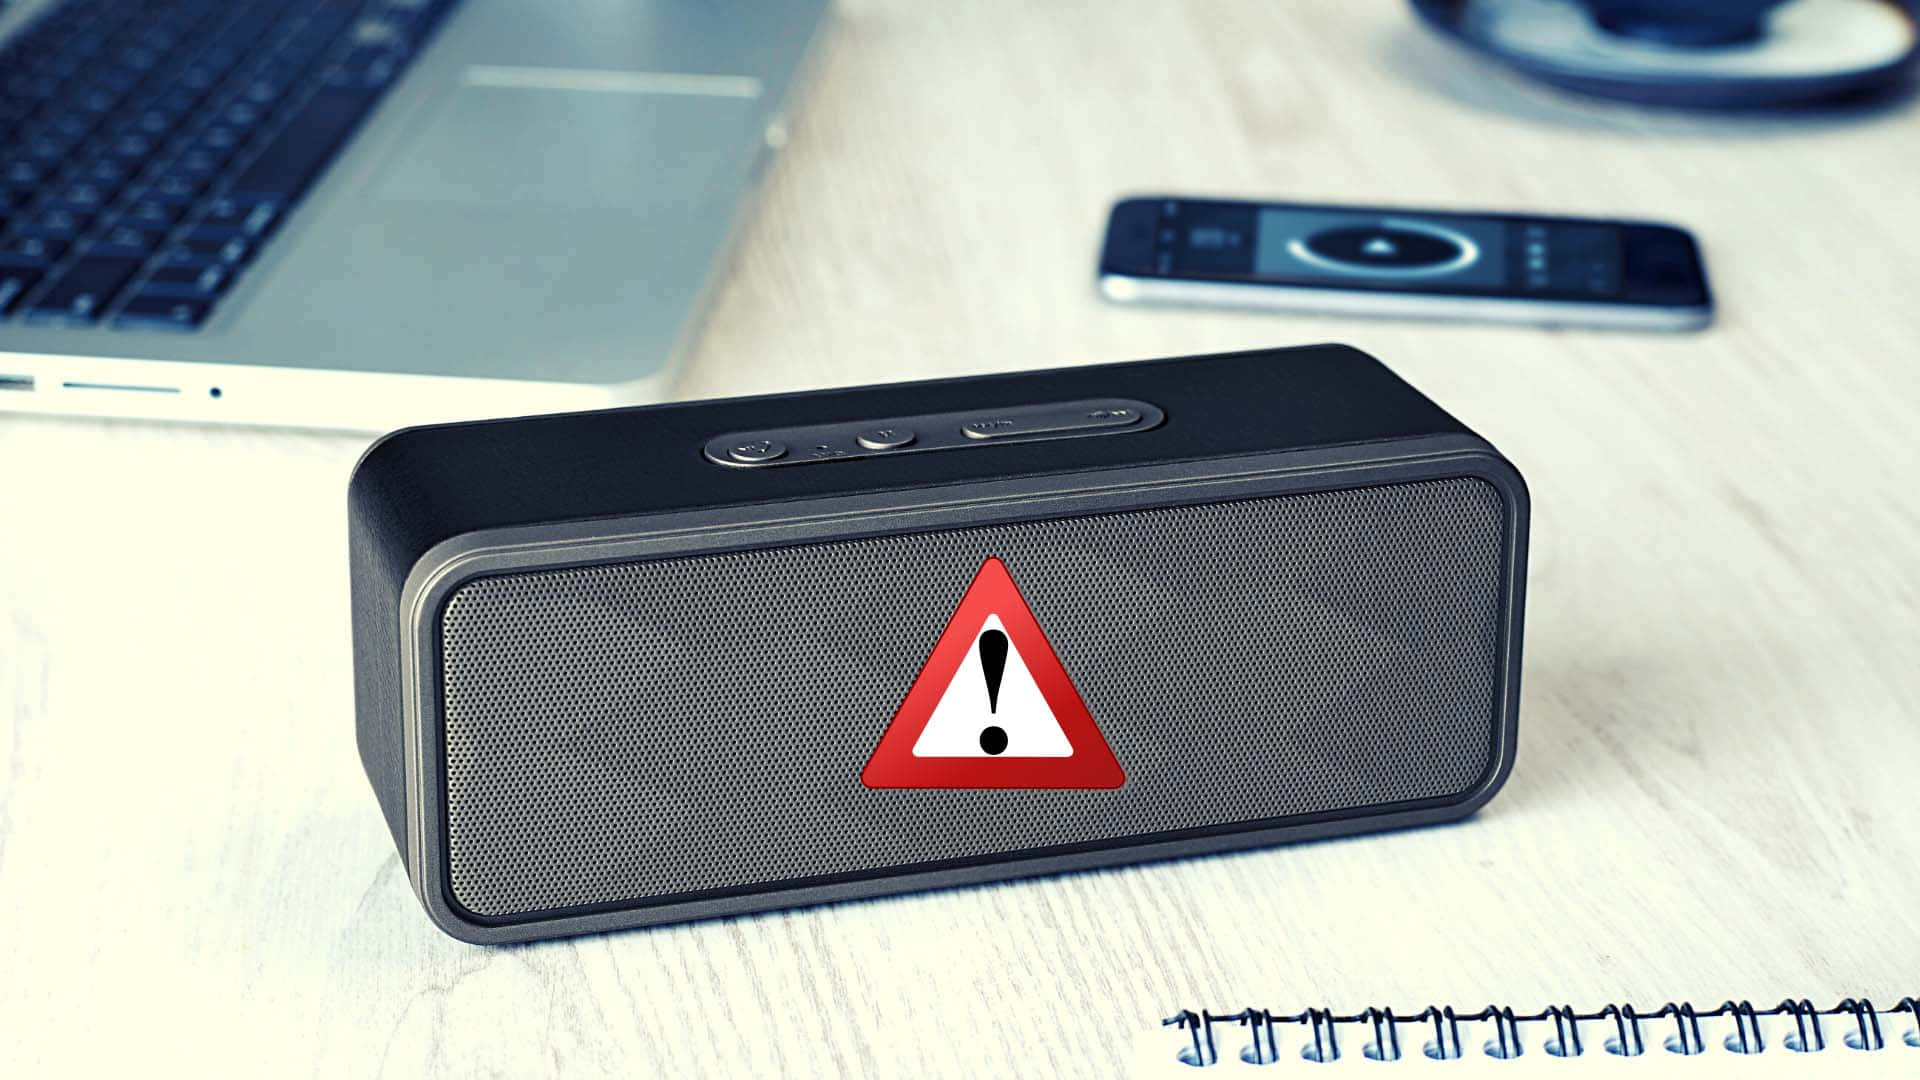 Black Portable Speaker With Exclamation Warning Illustration Picture